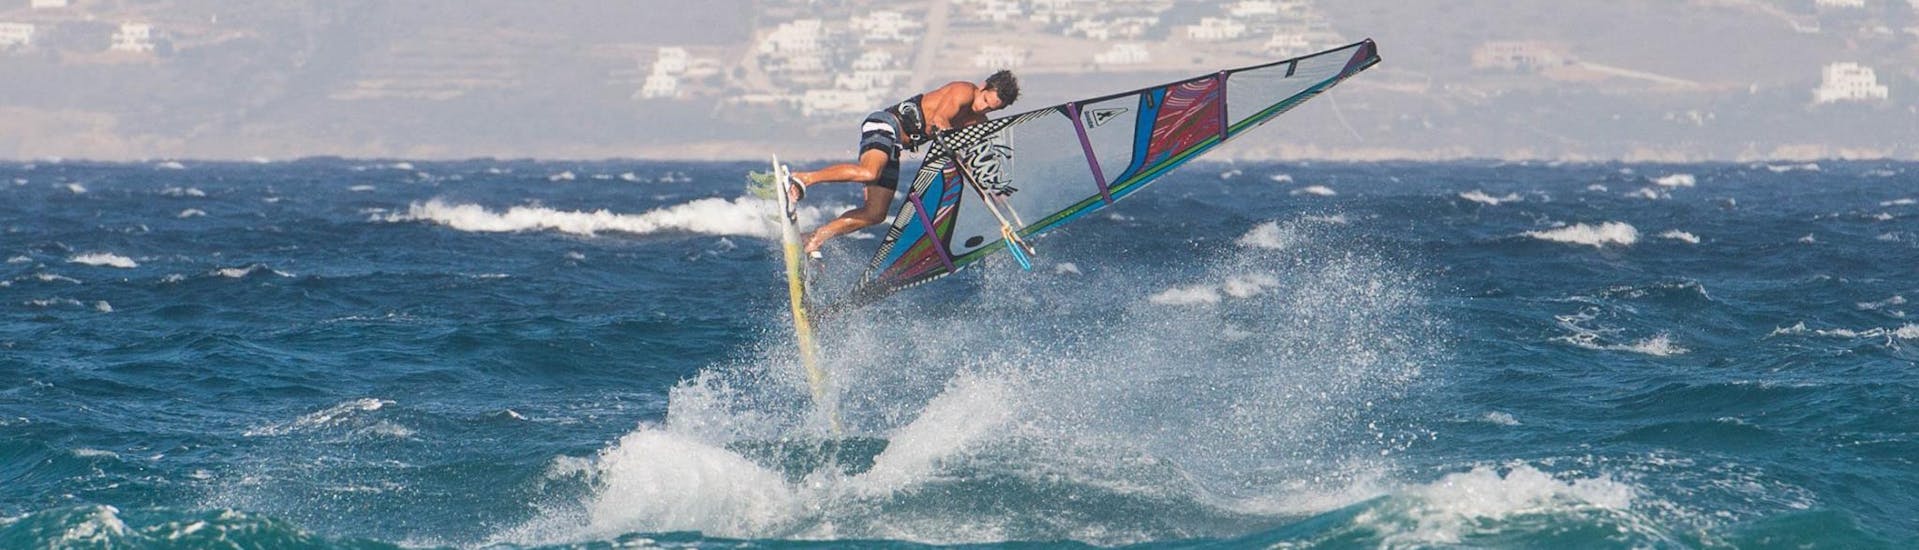 Windsurfing Lessons for Kids &amp; Adults - All Levels with Paros Windsurf Center - Hero image